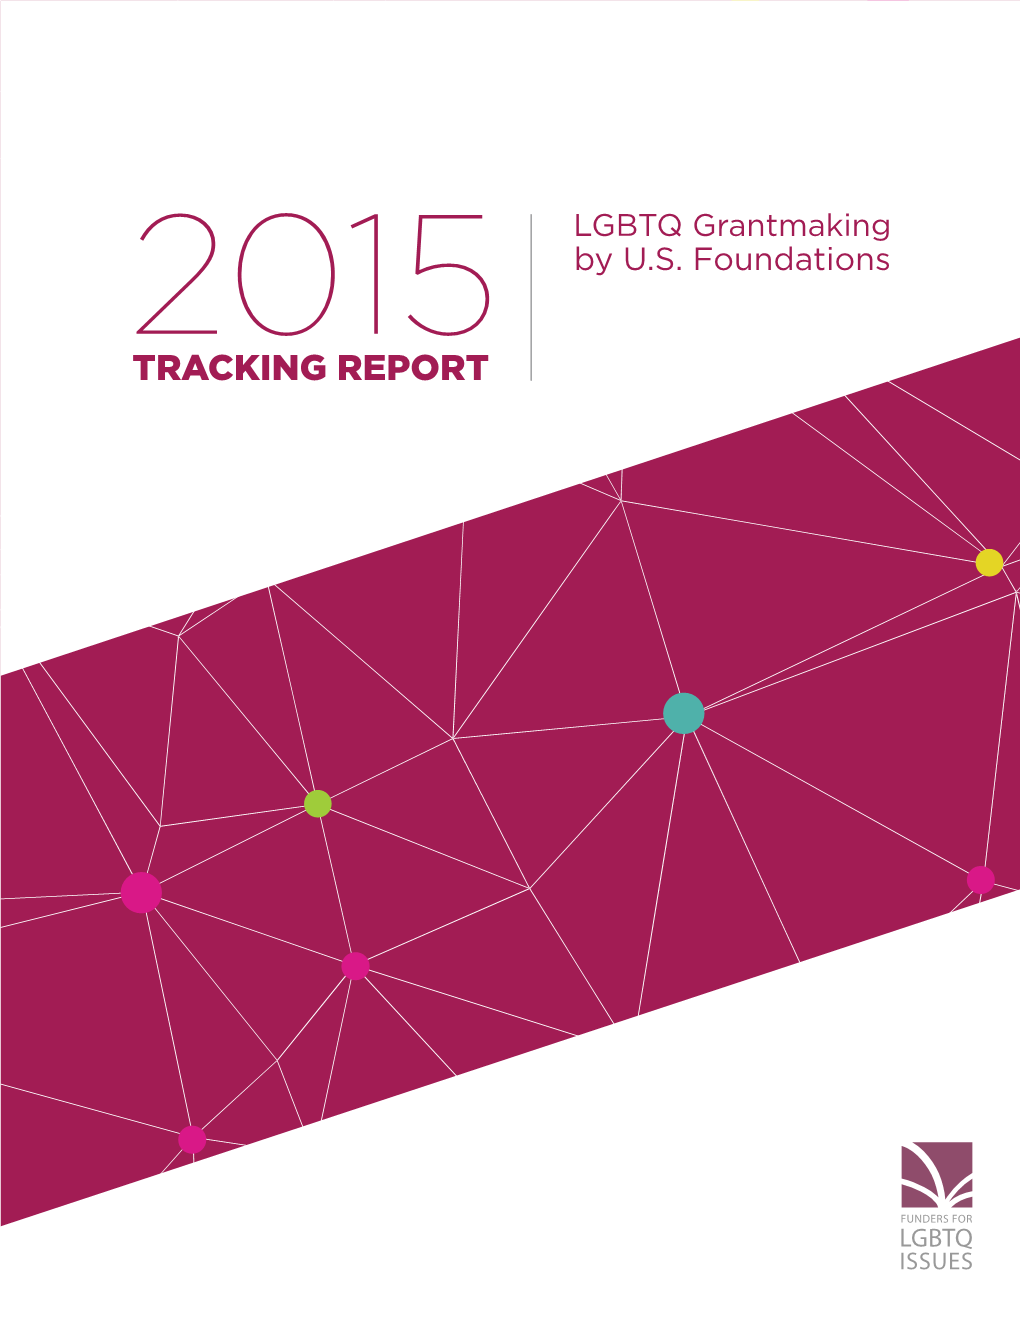 2015 TRACKING REPORT $160,702,984 1,990 334 Total Investment Grantees Foundations 5,267 in LGBTQ Issues and Corporations Grants Invested in LGBTQ Issues